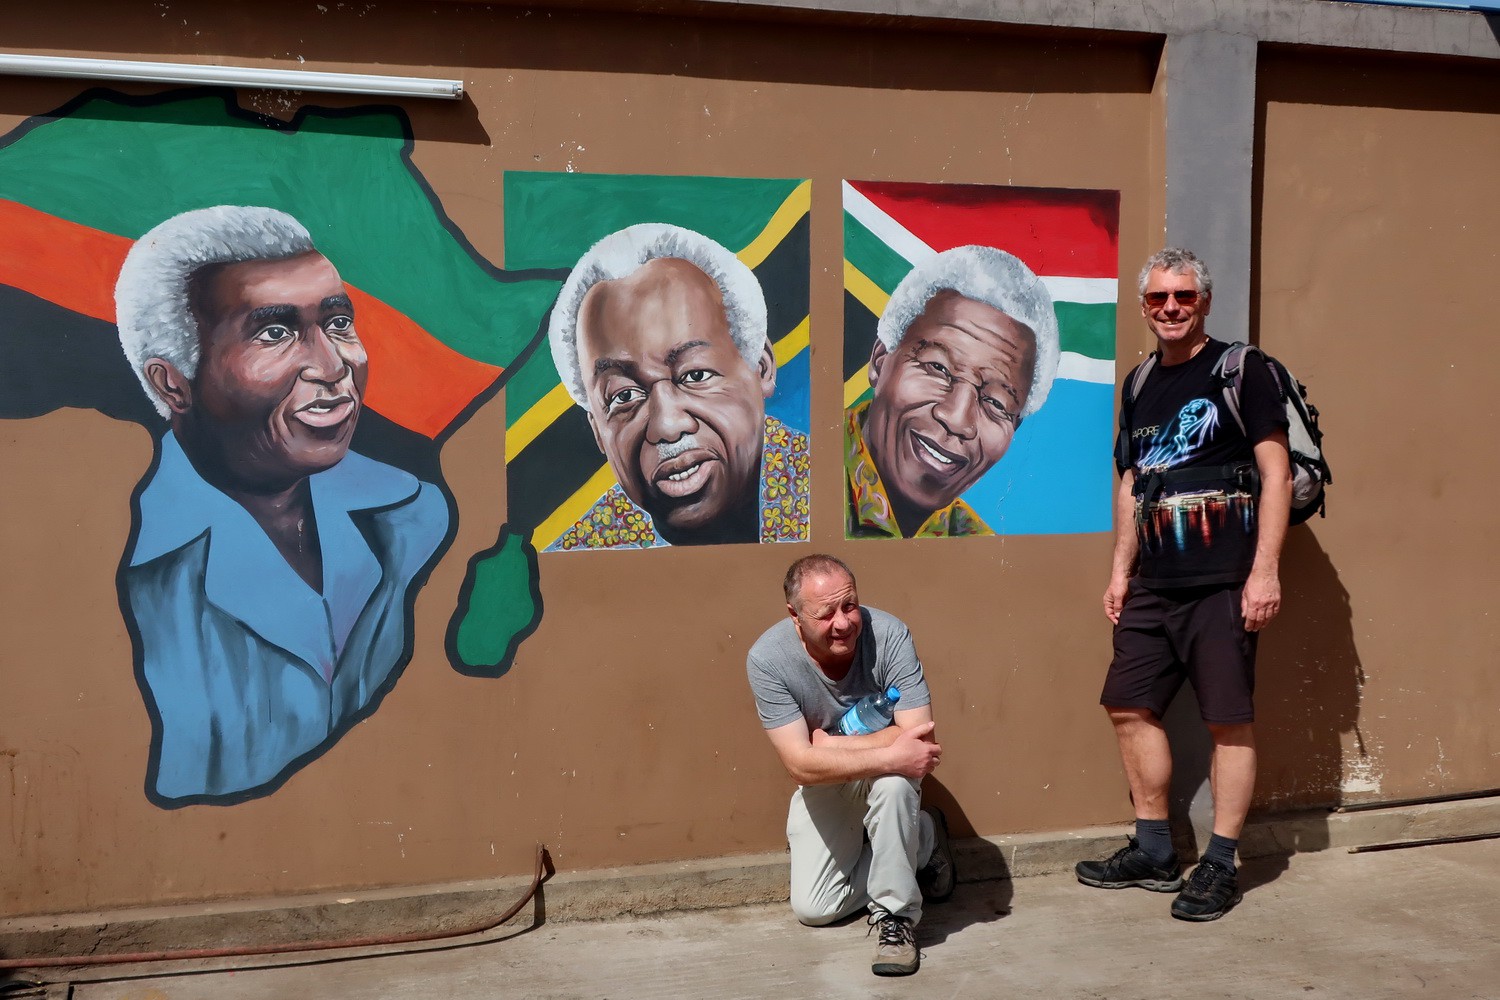 African politicians on the wall - Julius Nyerere (center) and Nelson Mandela (right)